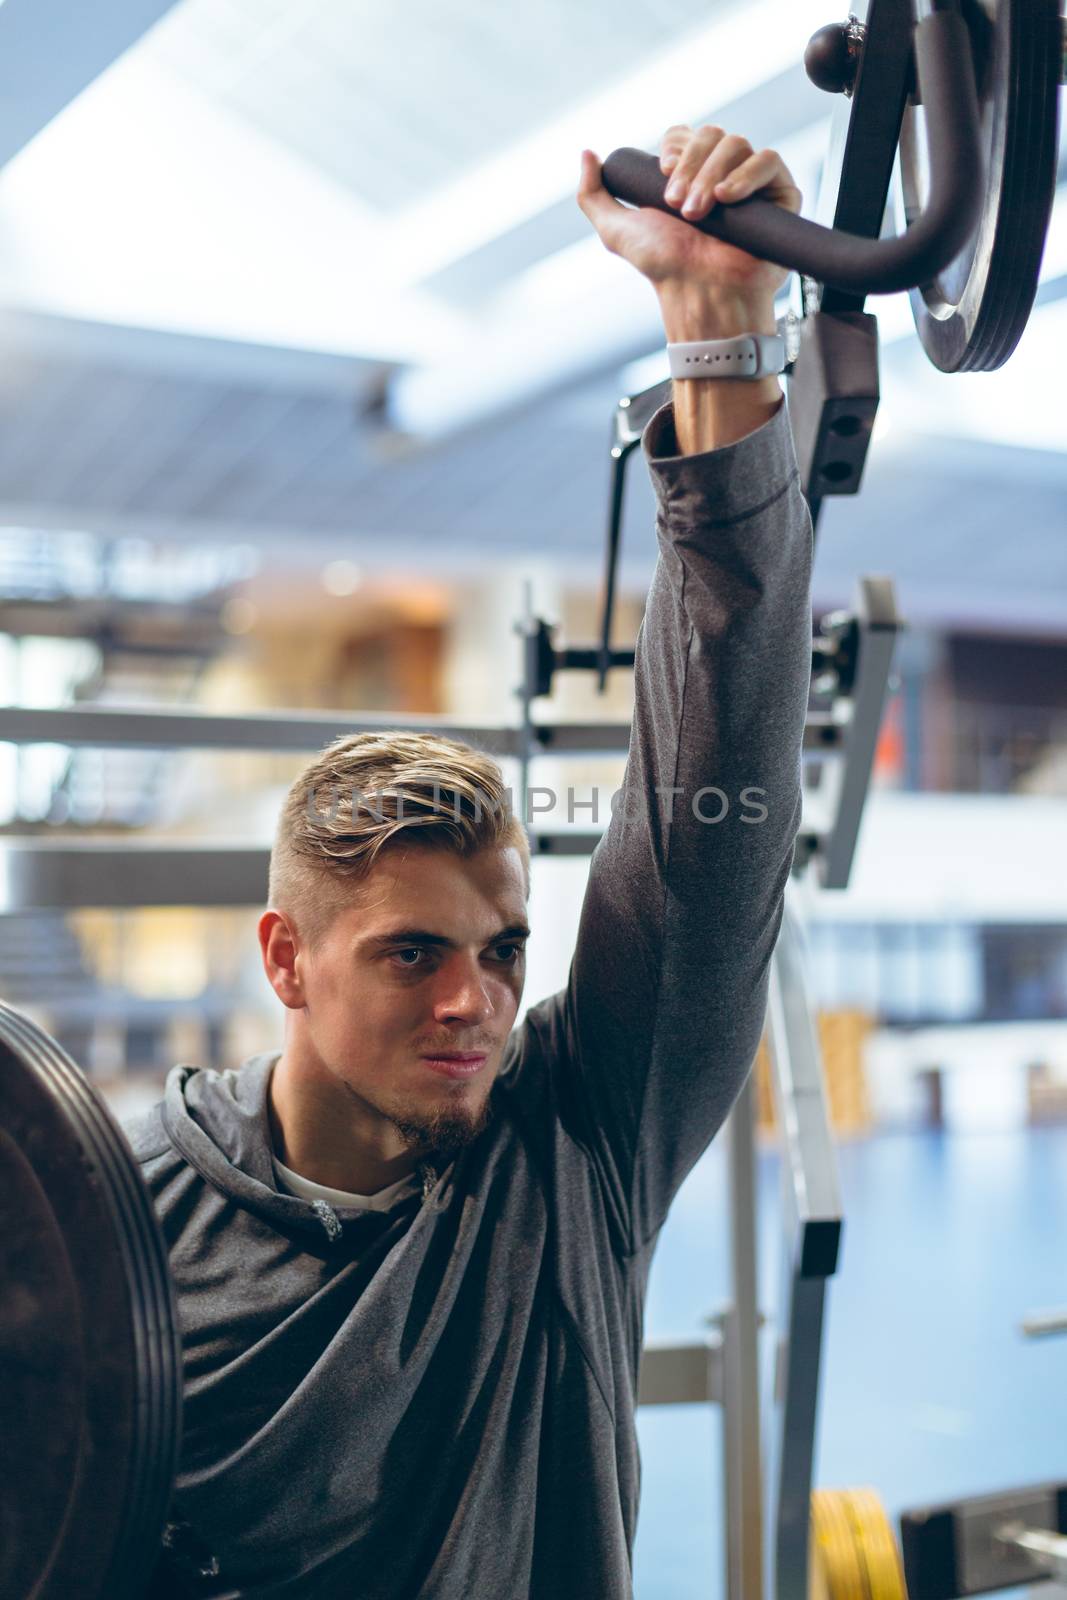 Man exercising with shoulder machine in fitness studio by Wavebreakmedia